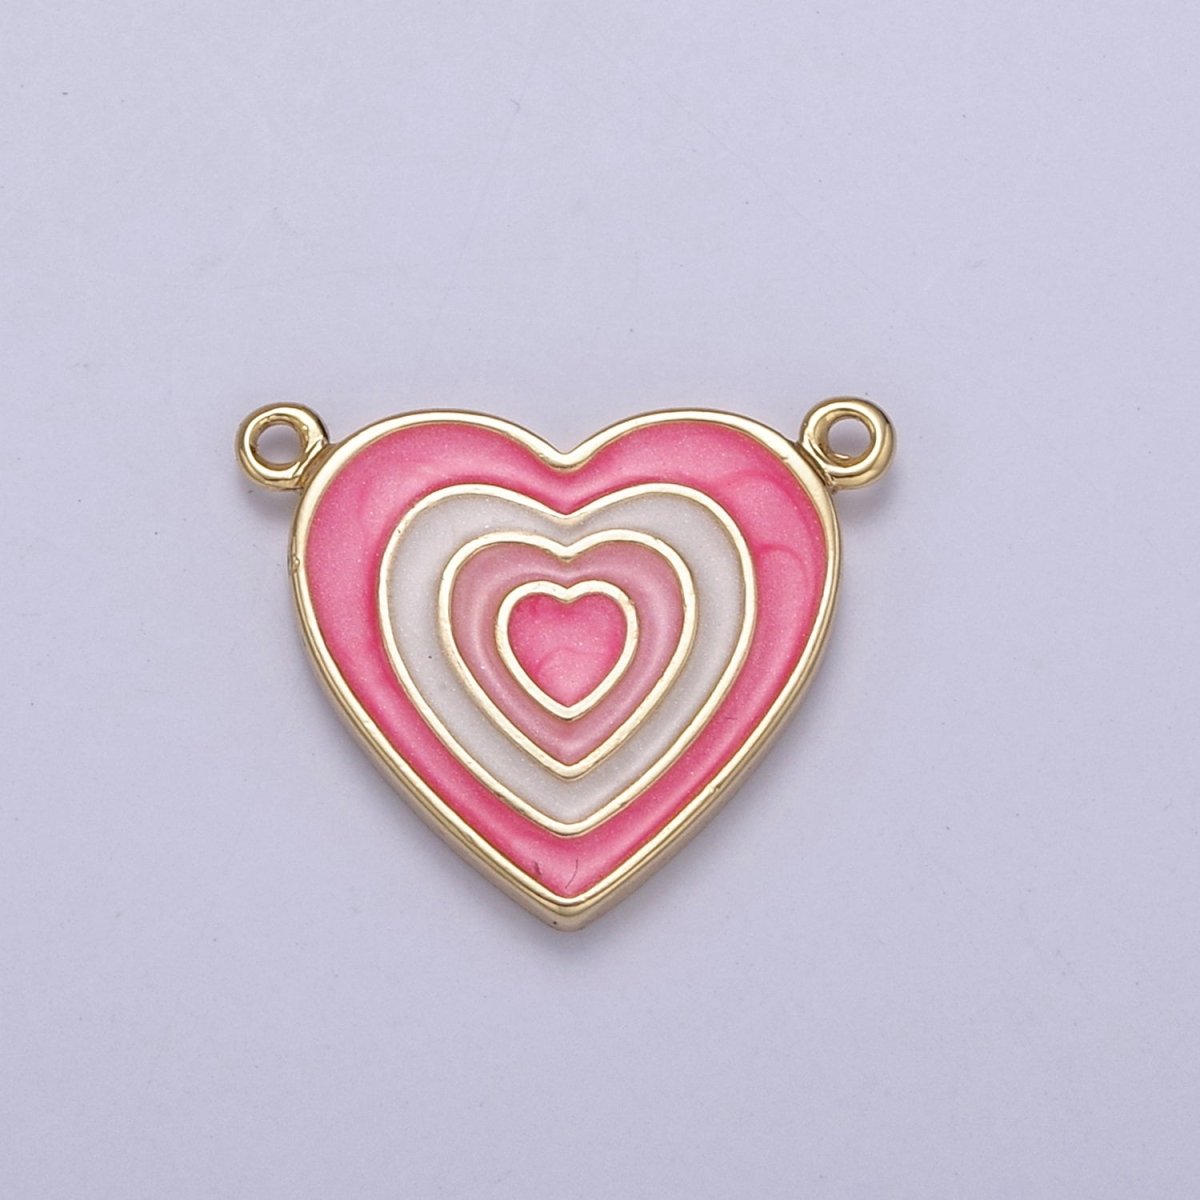 Pink Enamel Heart Charm Connector with You are Loved for Valentine Jewelry Making Supply F-814 - DLUXCA